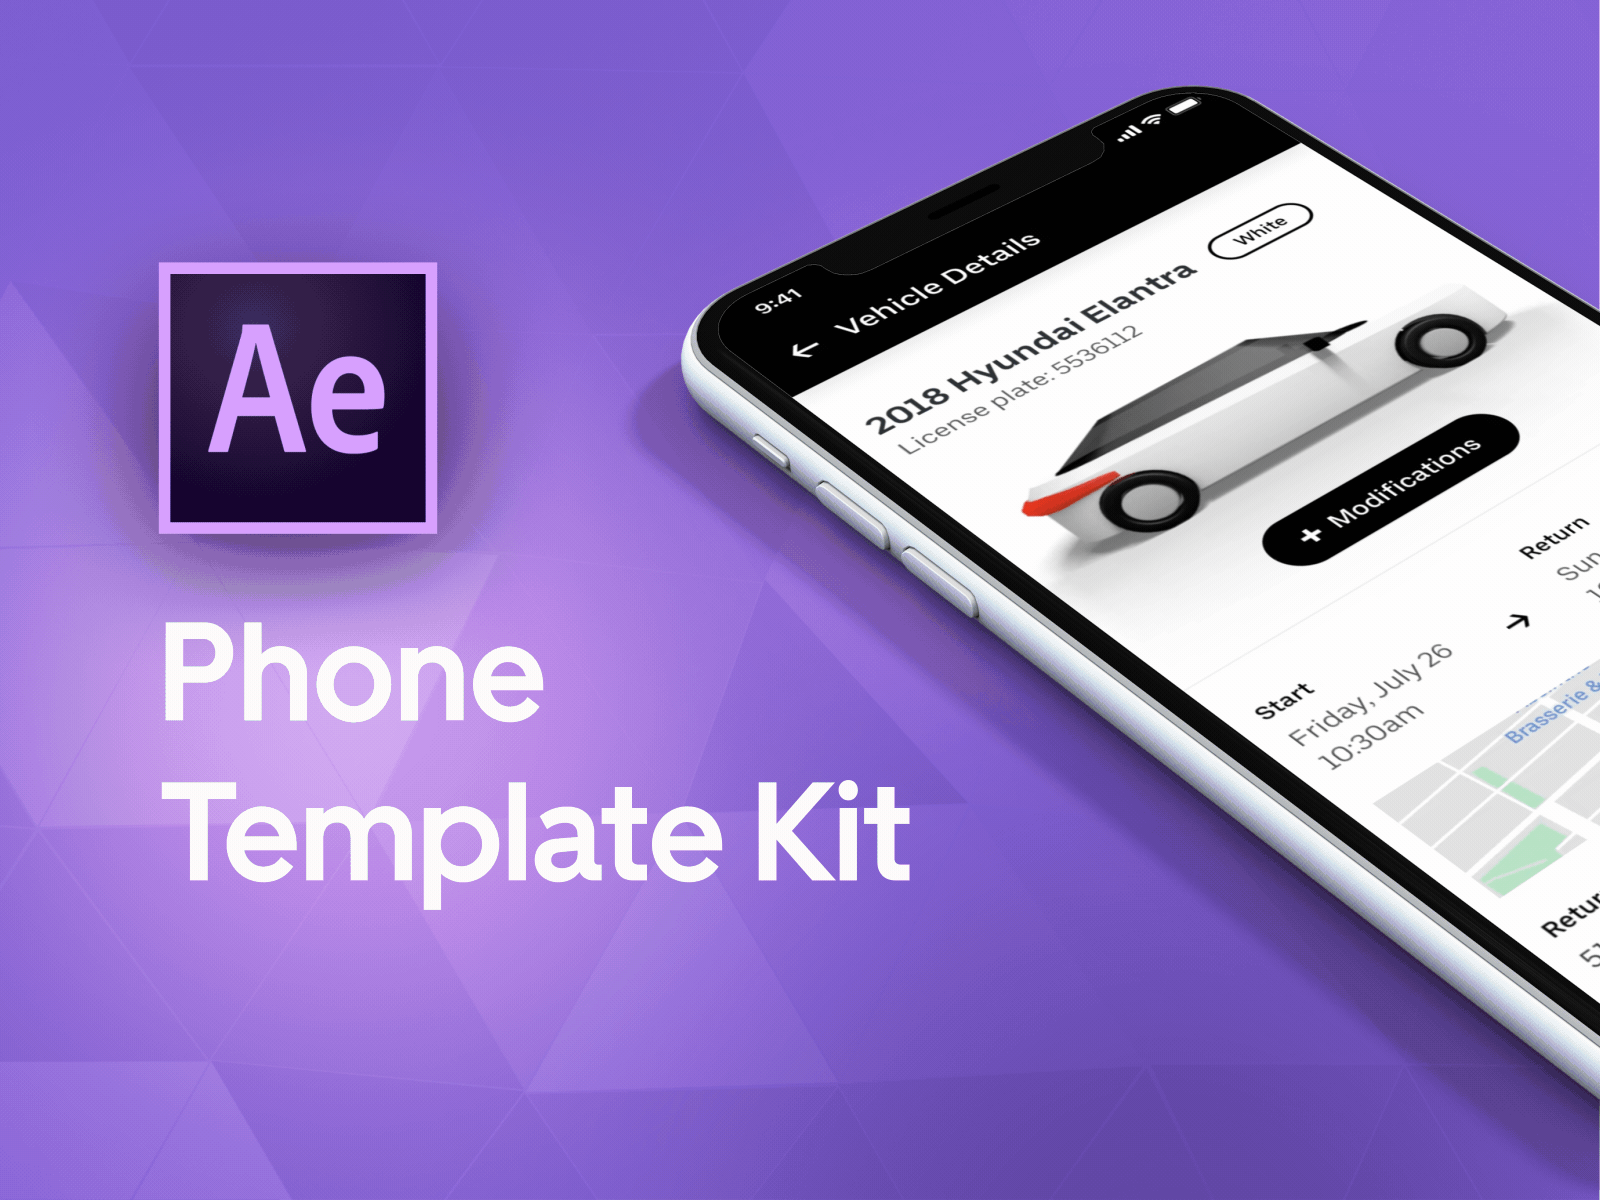 Free After Effects 3D Phone Templates by Brett Banning on Dribbble